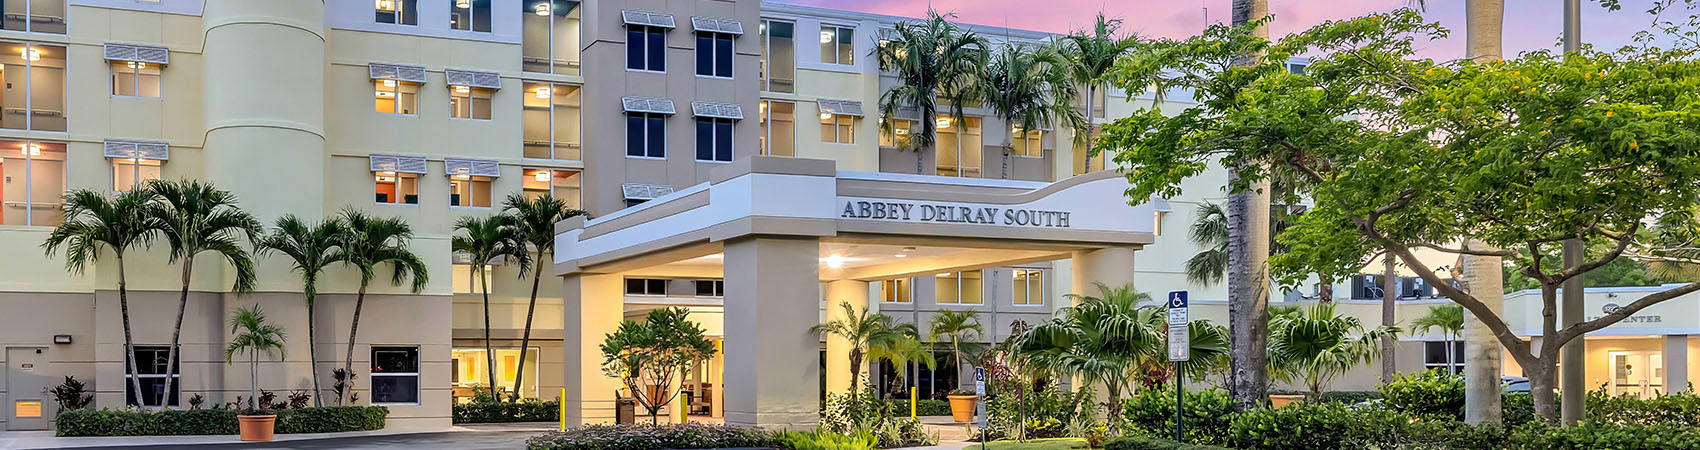 Photo Video Gallery Abbey Delray South